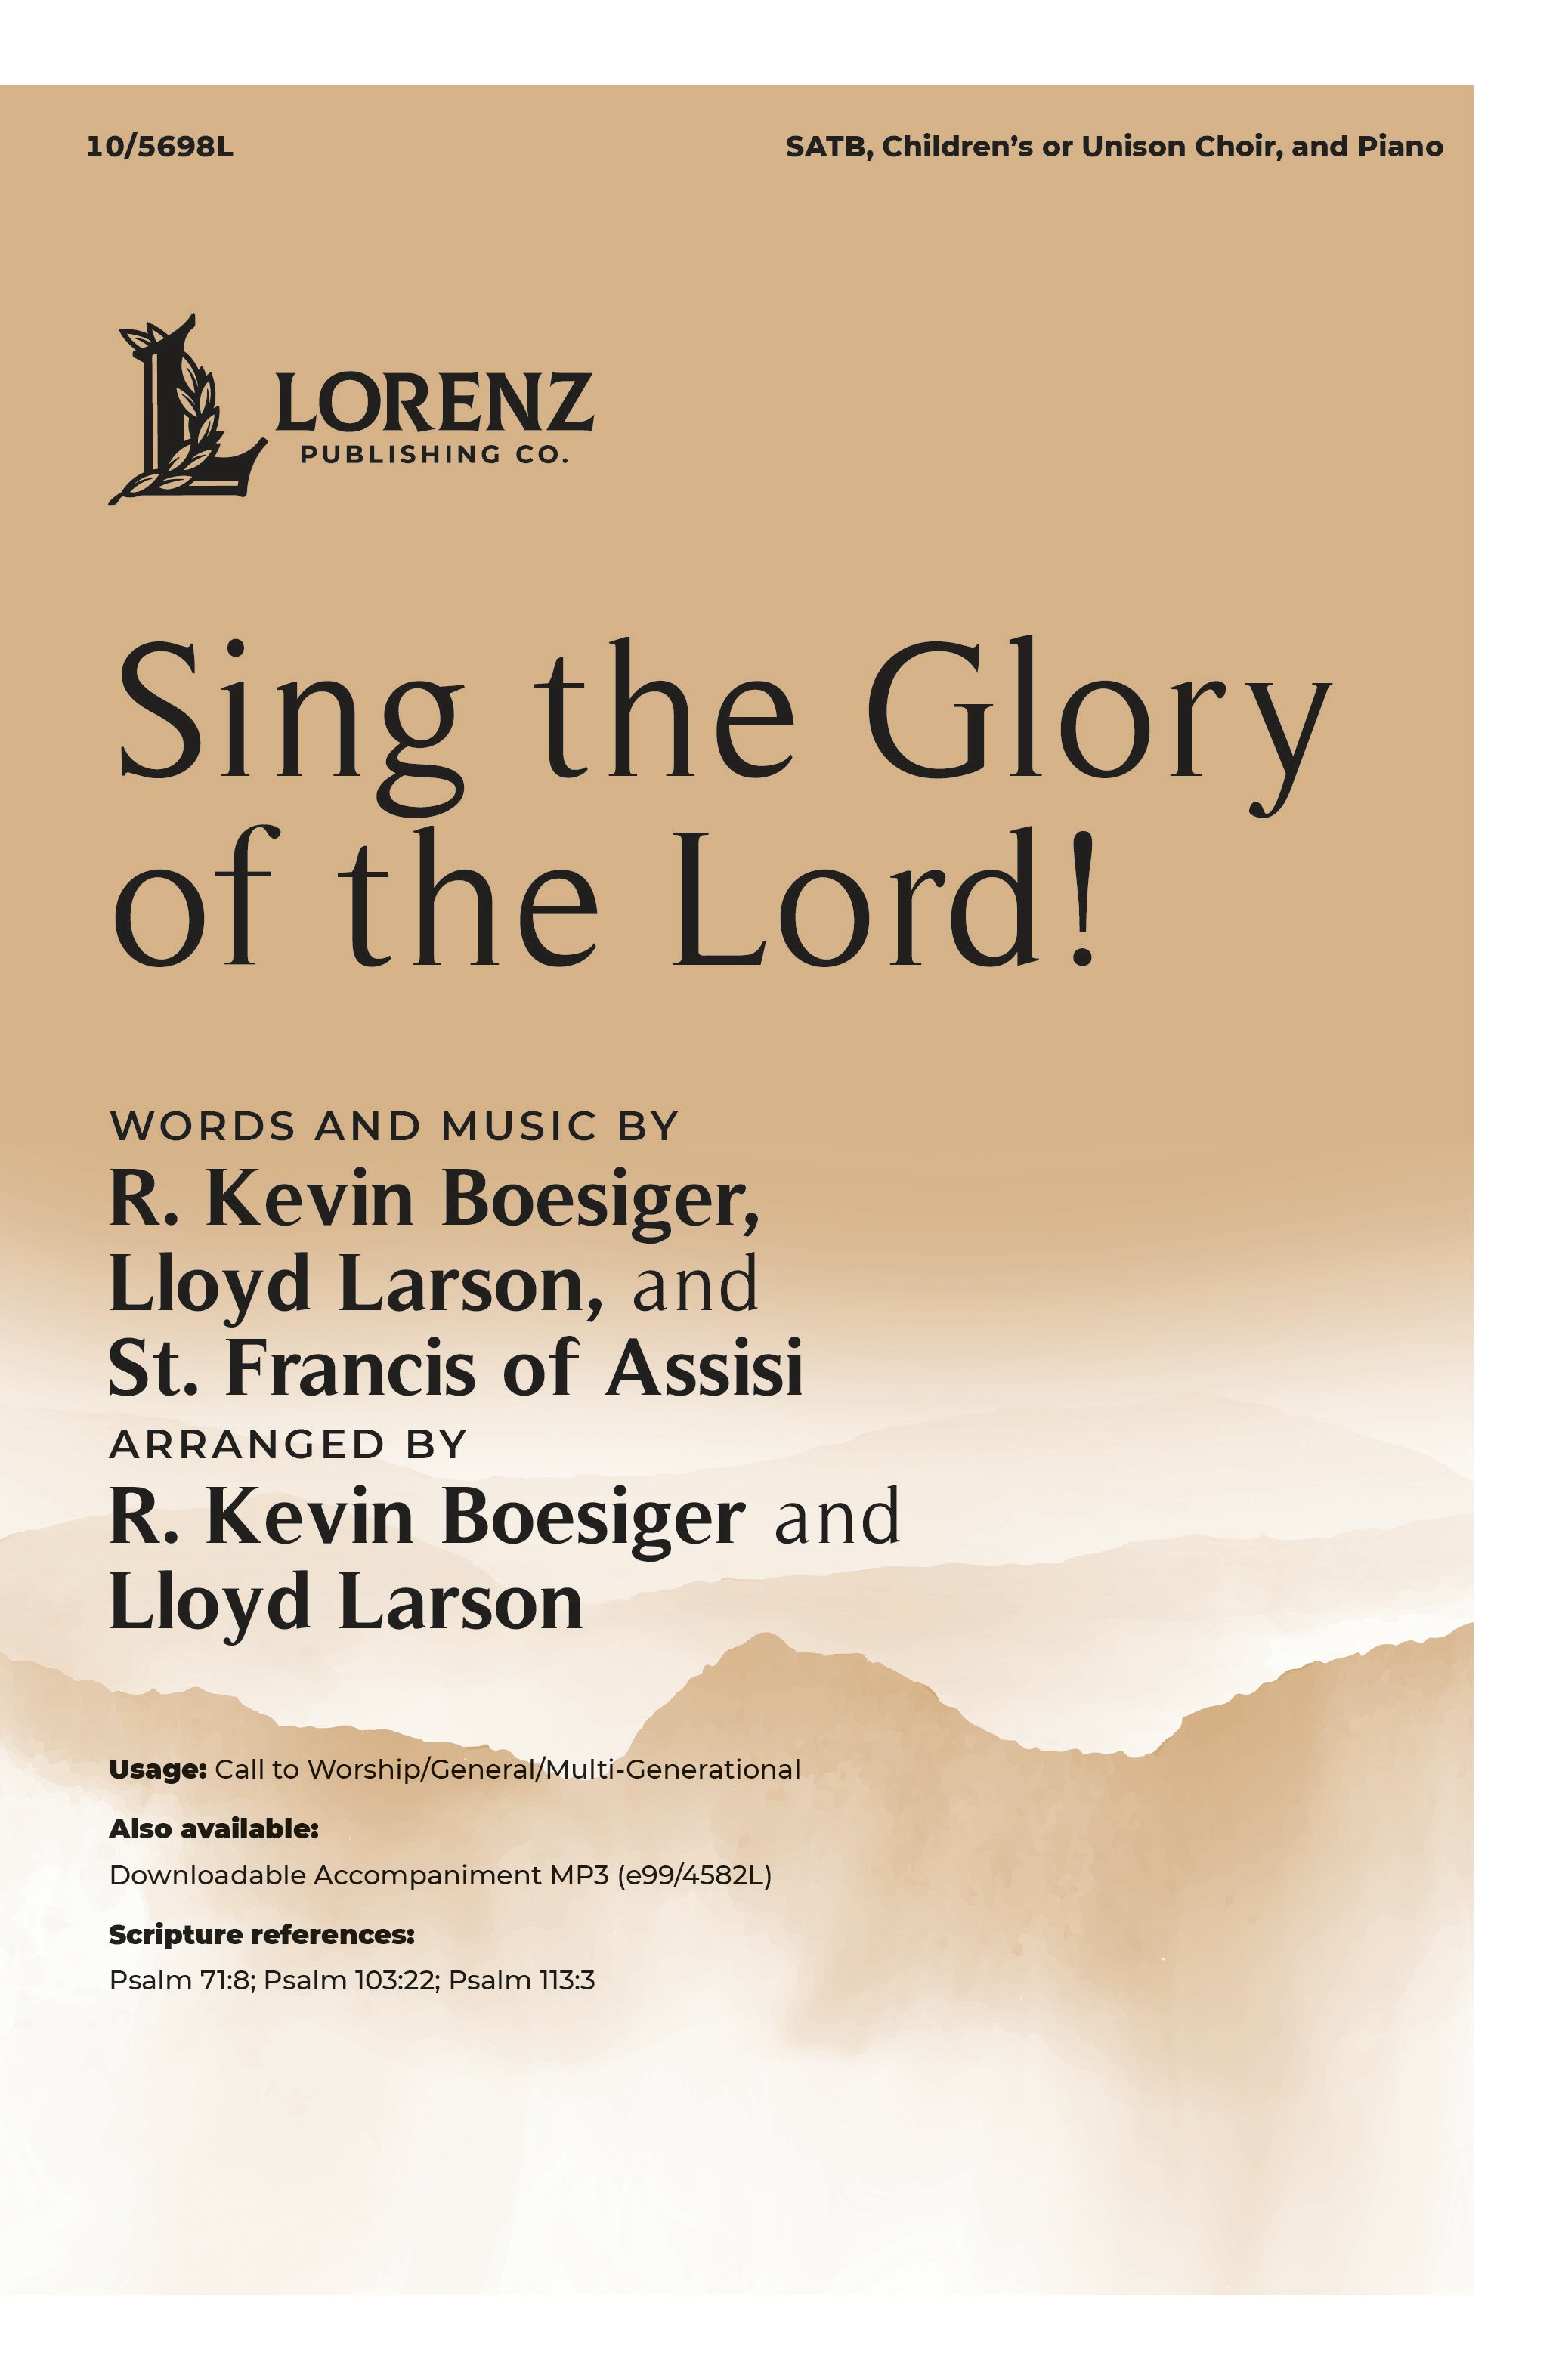 Sing the Glory of the Lord!